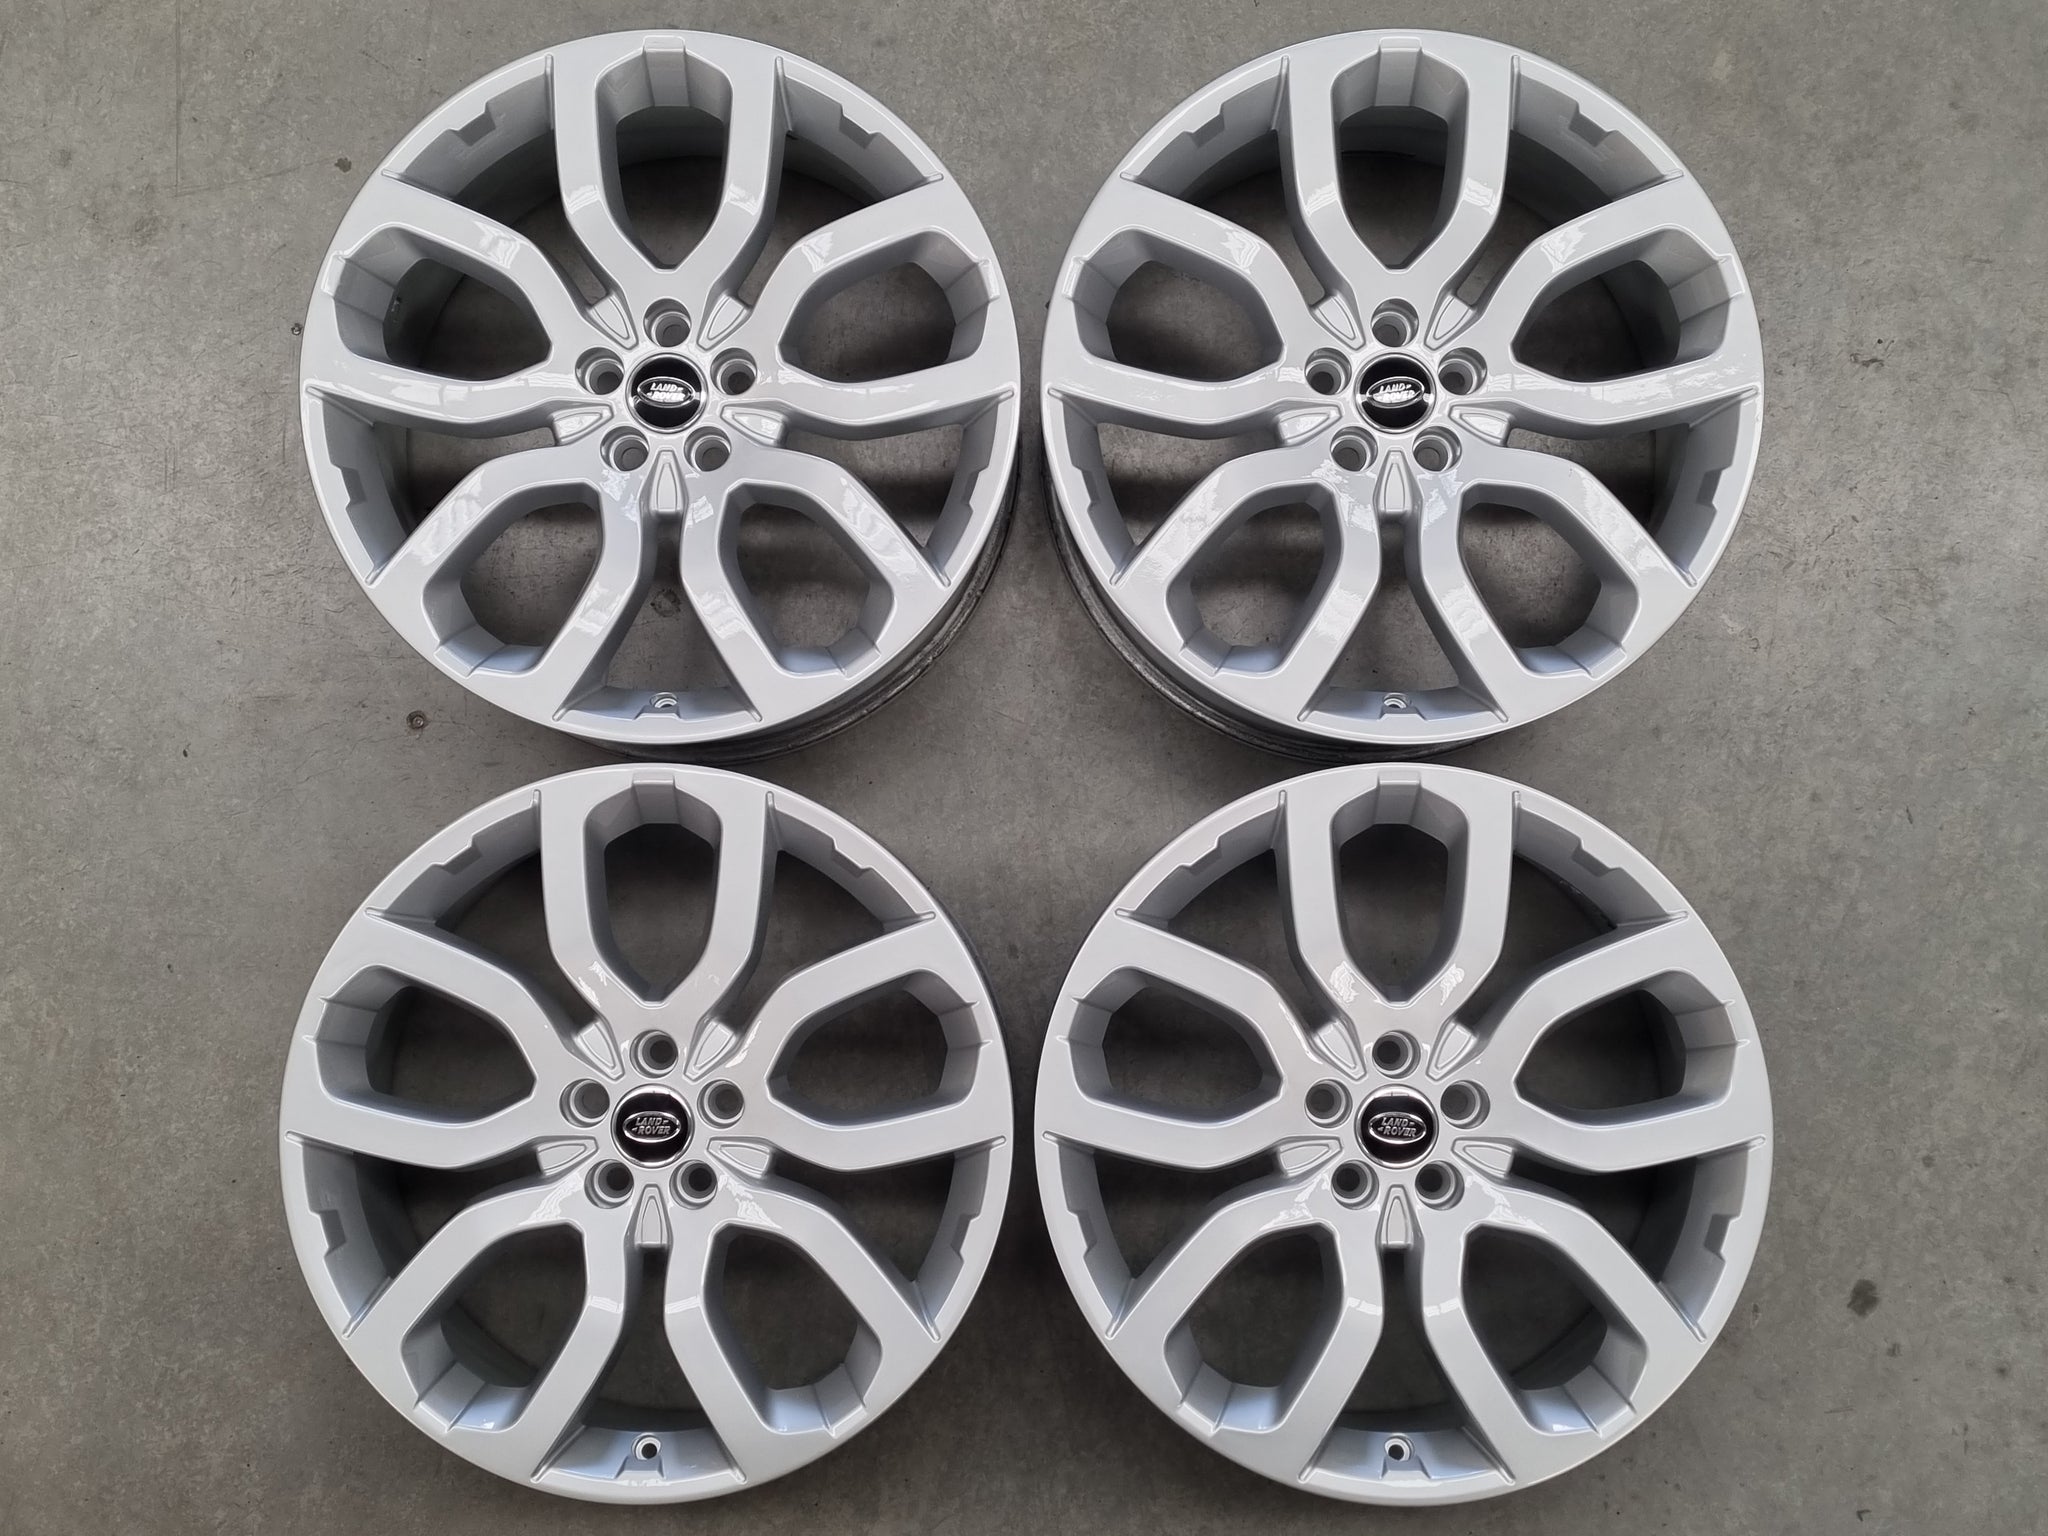 Load image into Gallery viewer, Genuine Range Rover Evoque Silver 20 Inch Alloy Wheels Set of 4
